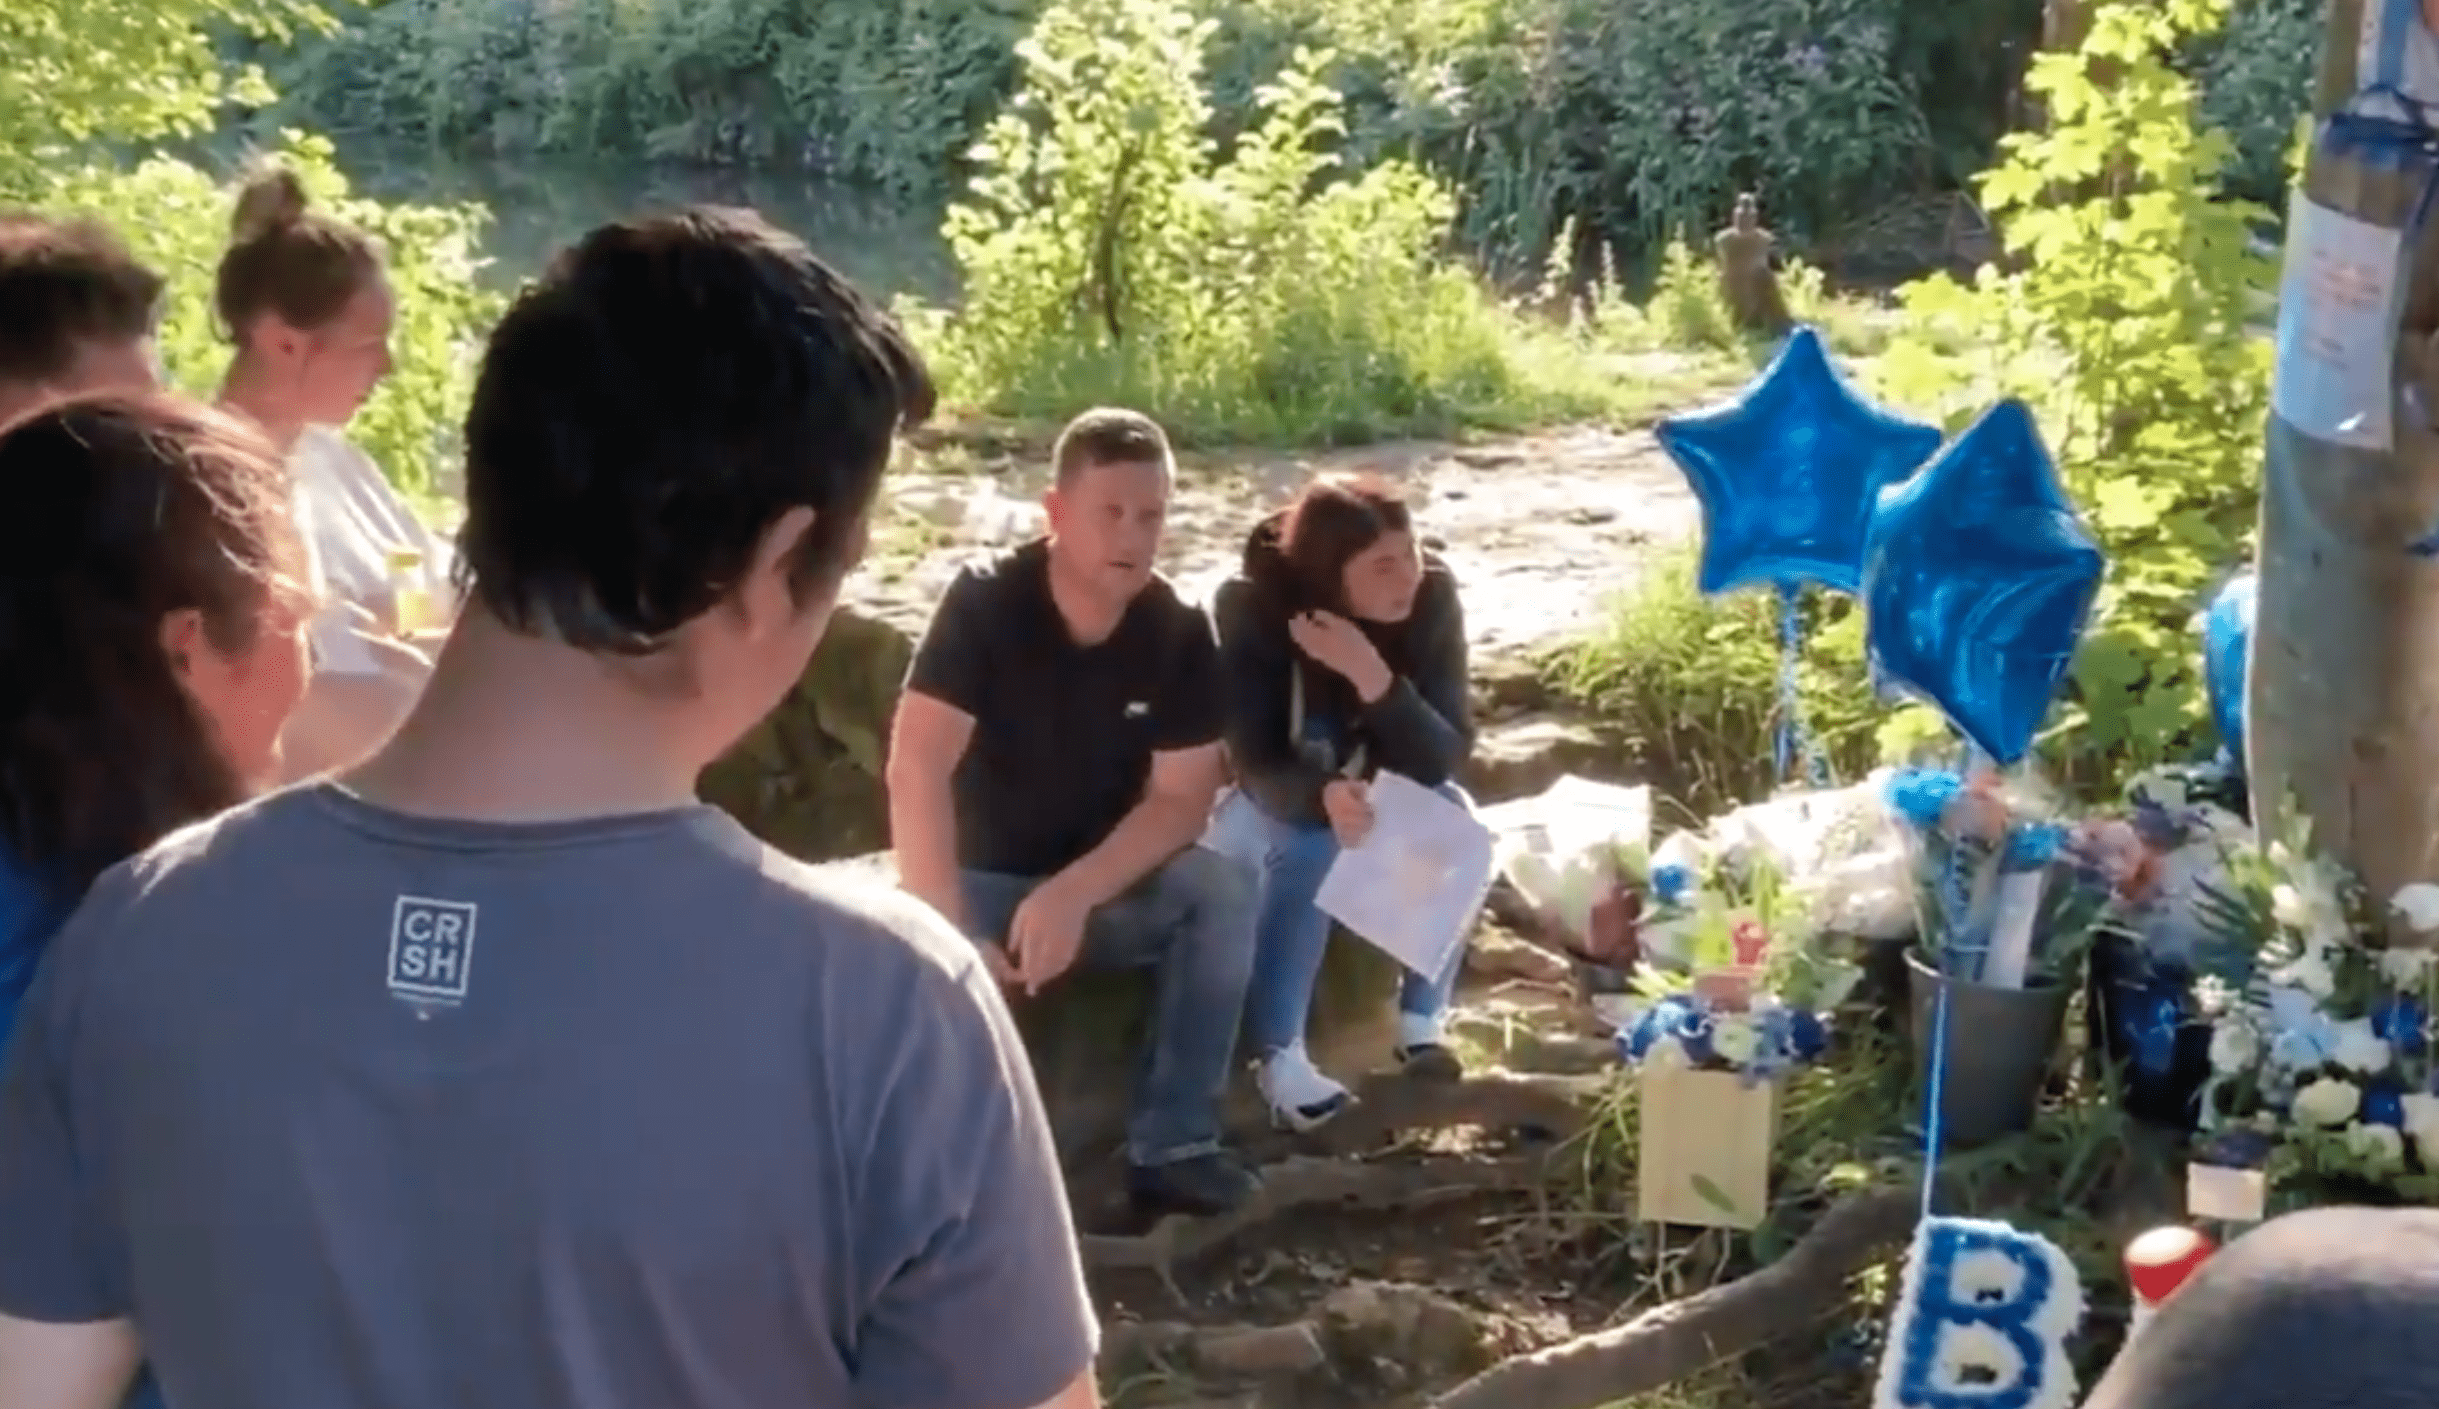 Loved ones gather next to a canal with balloons and cards to honor a young boy who drowned | Photo: Twitter/GHR_Derbyshire